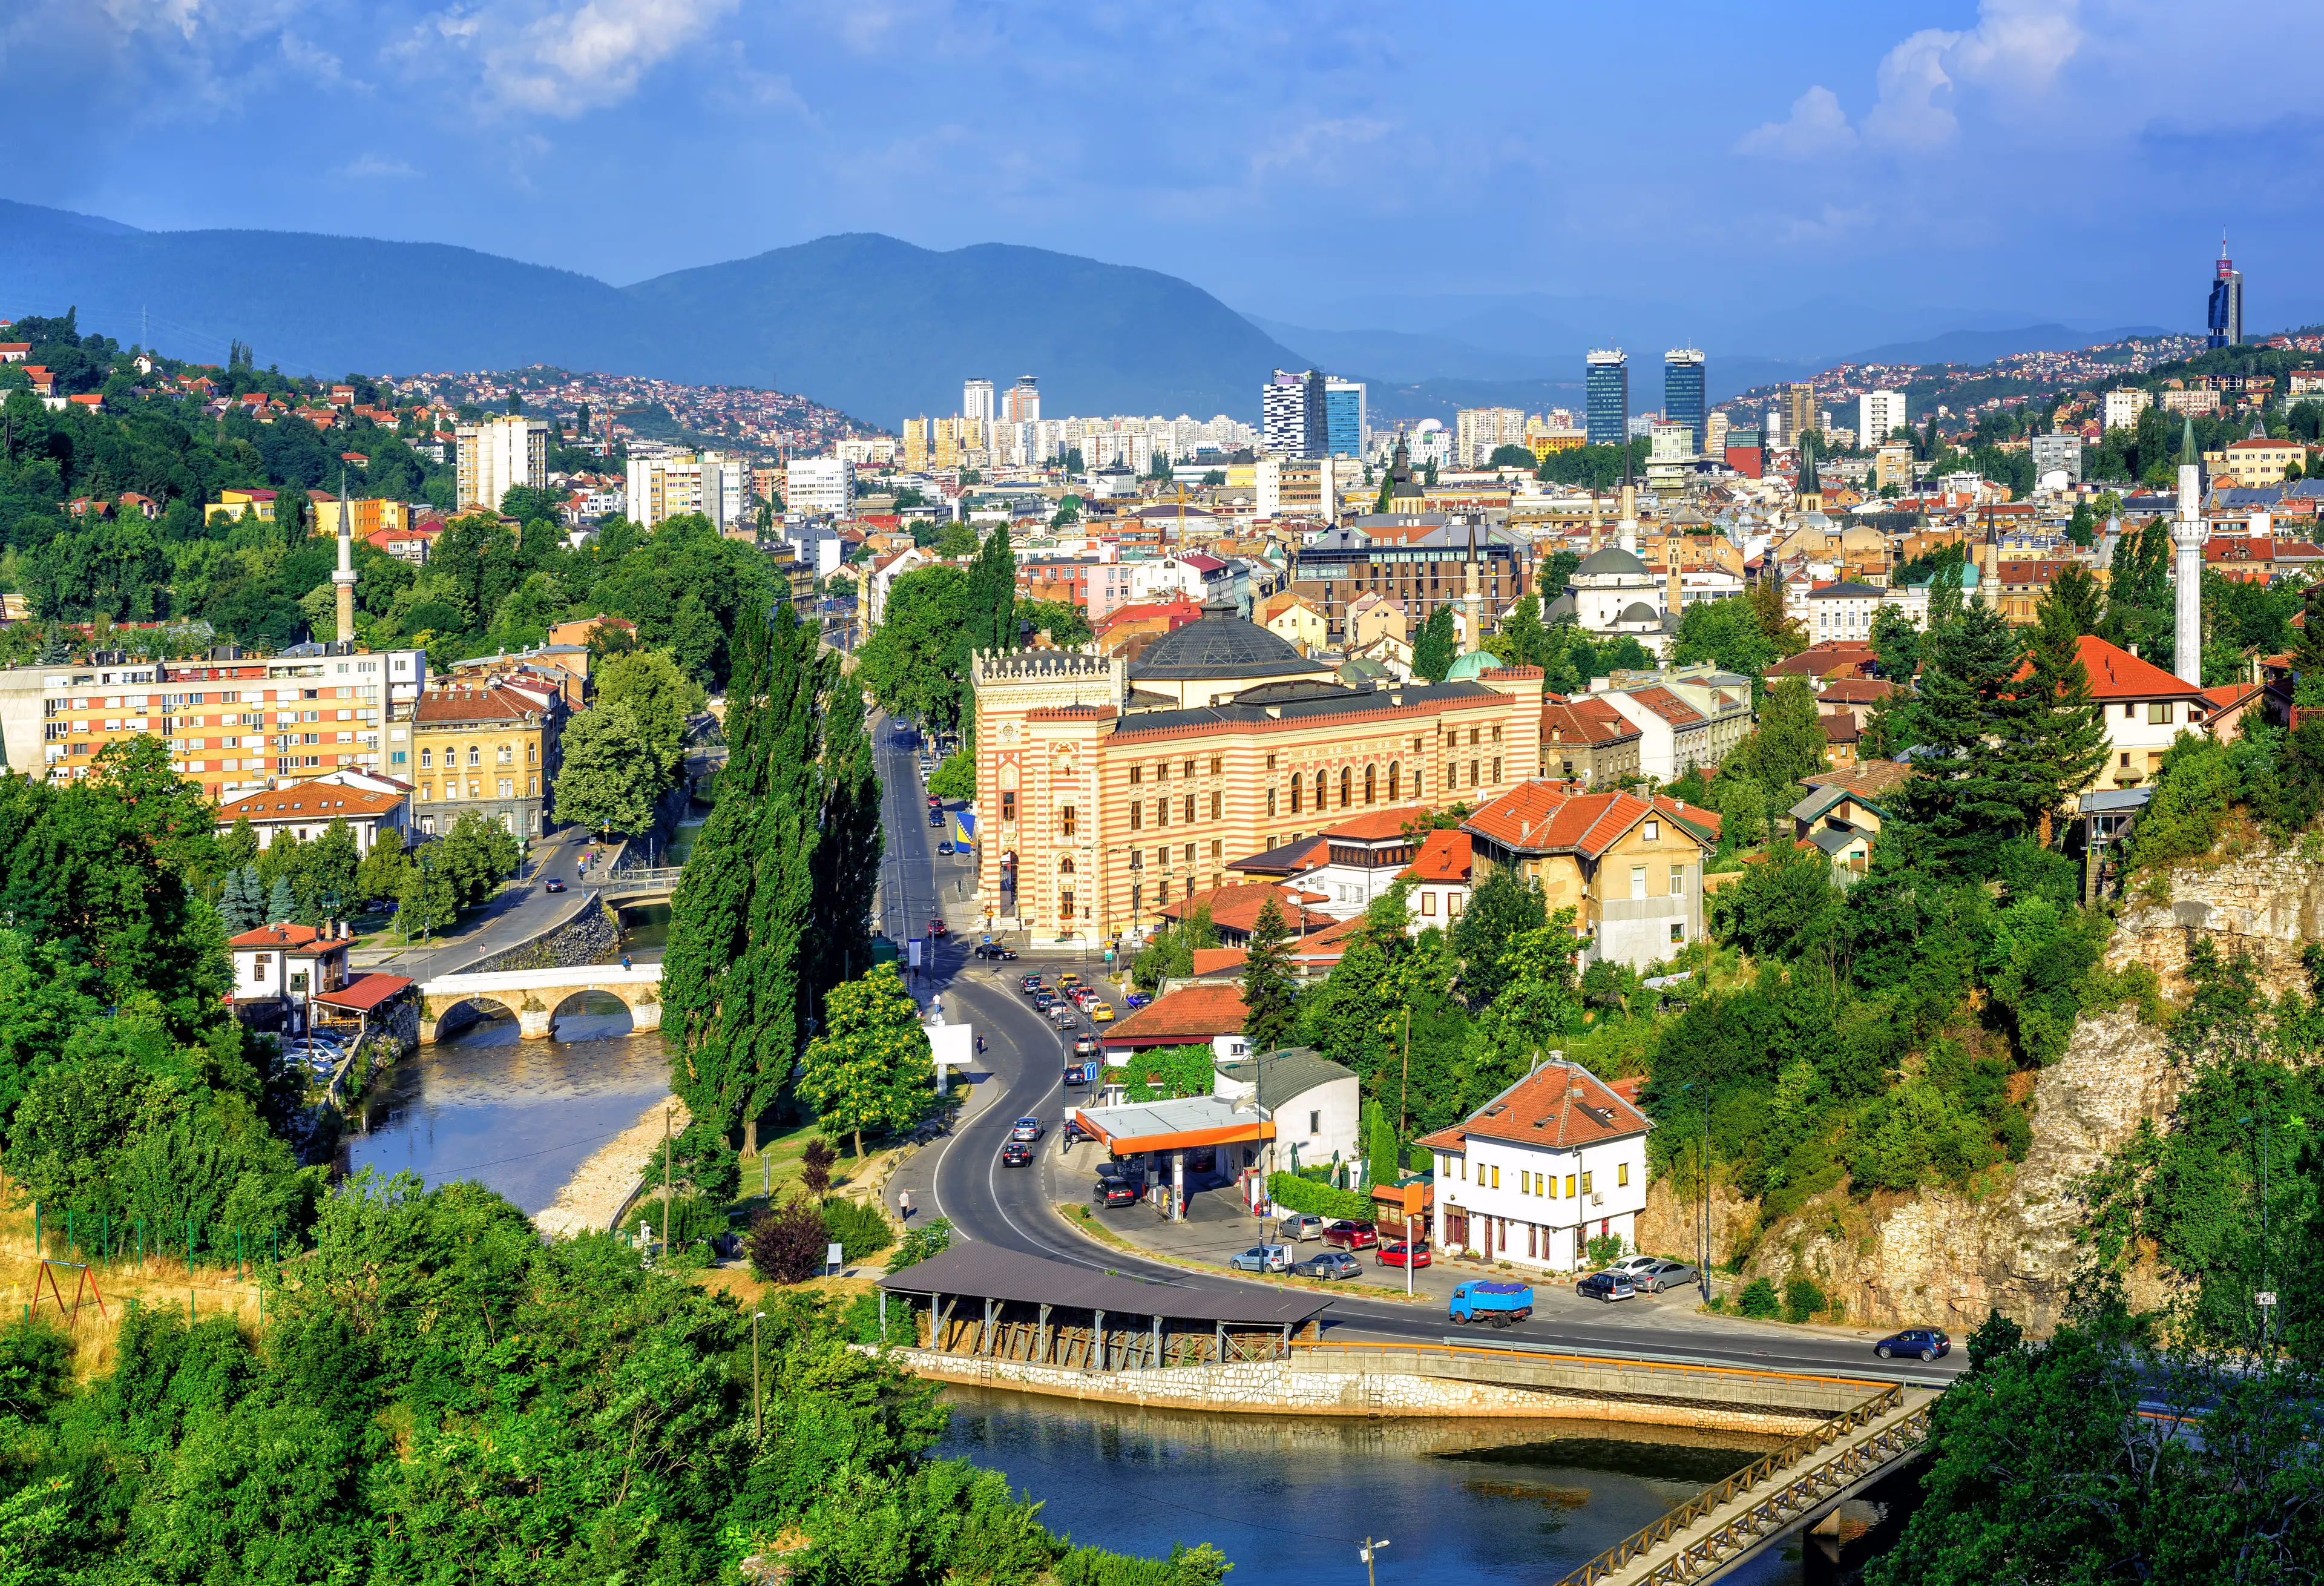 2-Day Sarajevo Sightseeing and Relaxation Trip with Friends